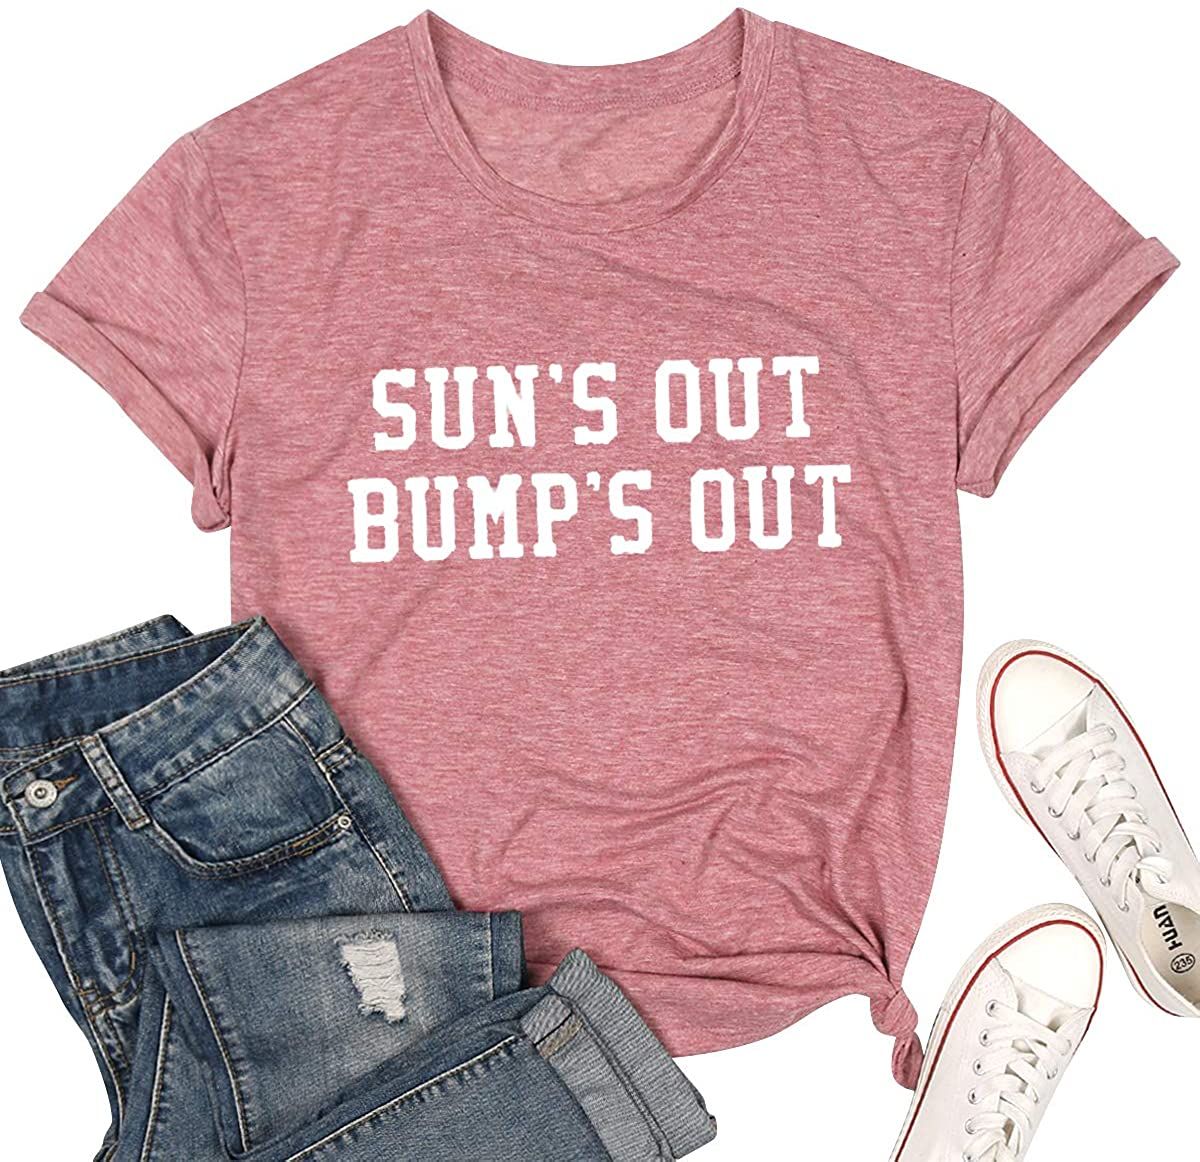 Sun's Out Bumps Out Shirt Women Maternity Pregnancy Funny Saying T-Shirt Summer Short Sleeve Casual Tops Tees